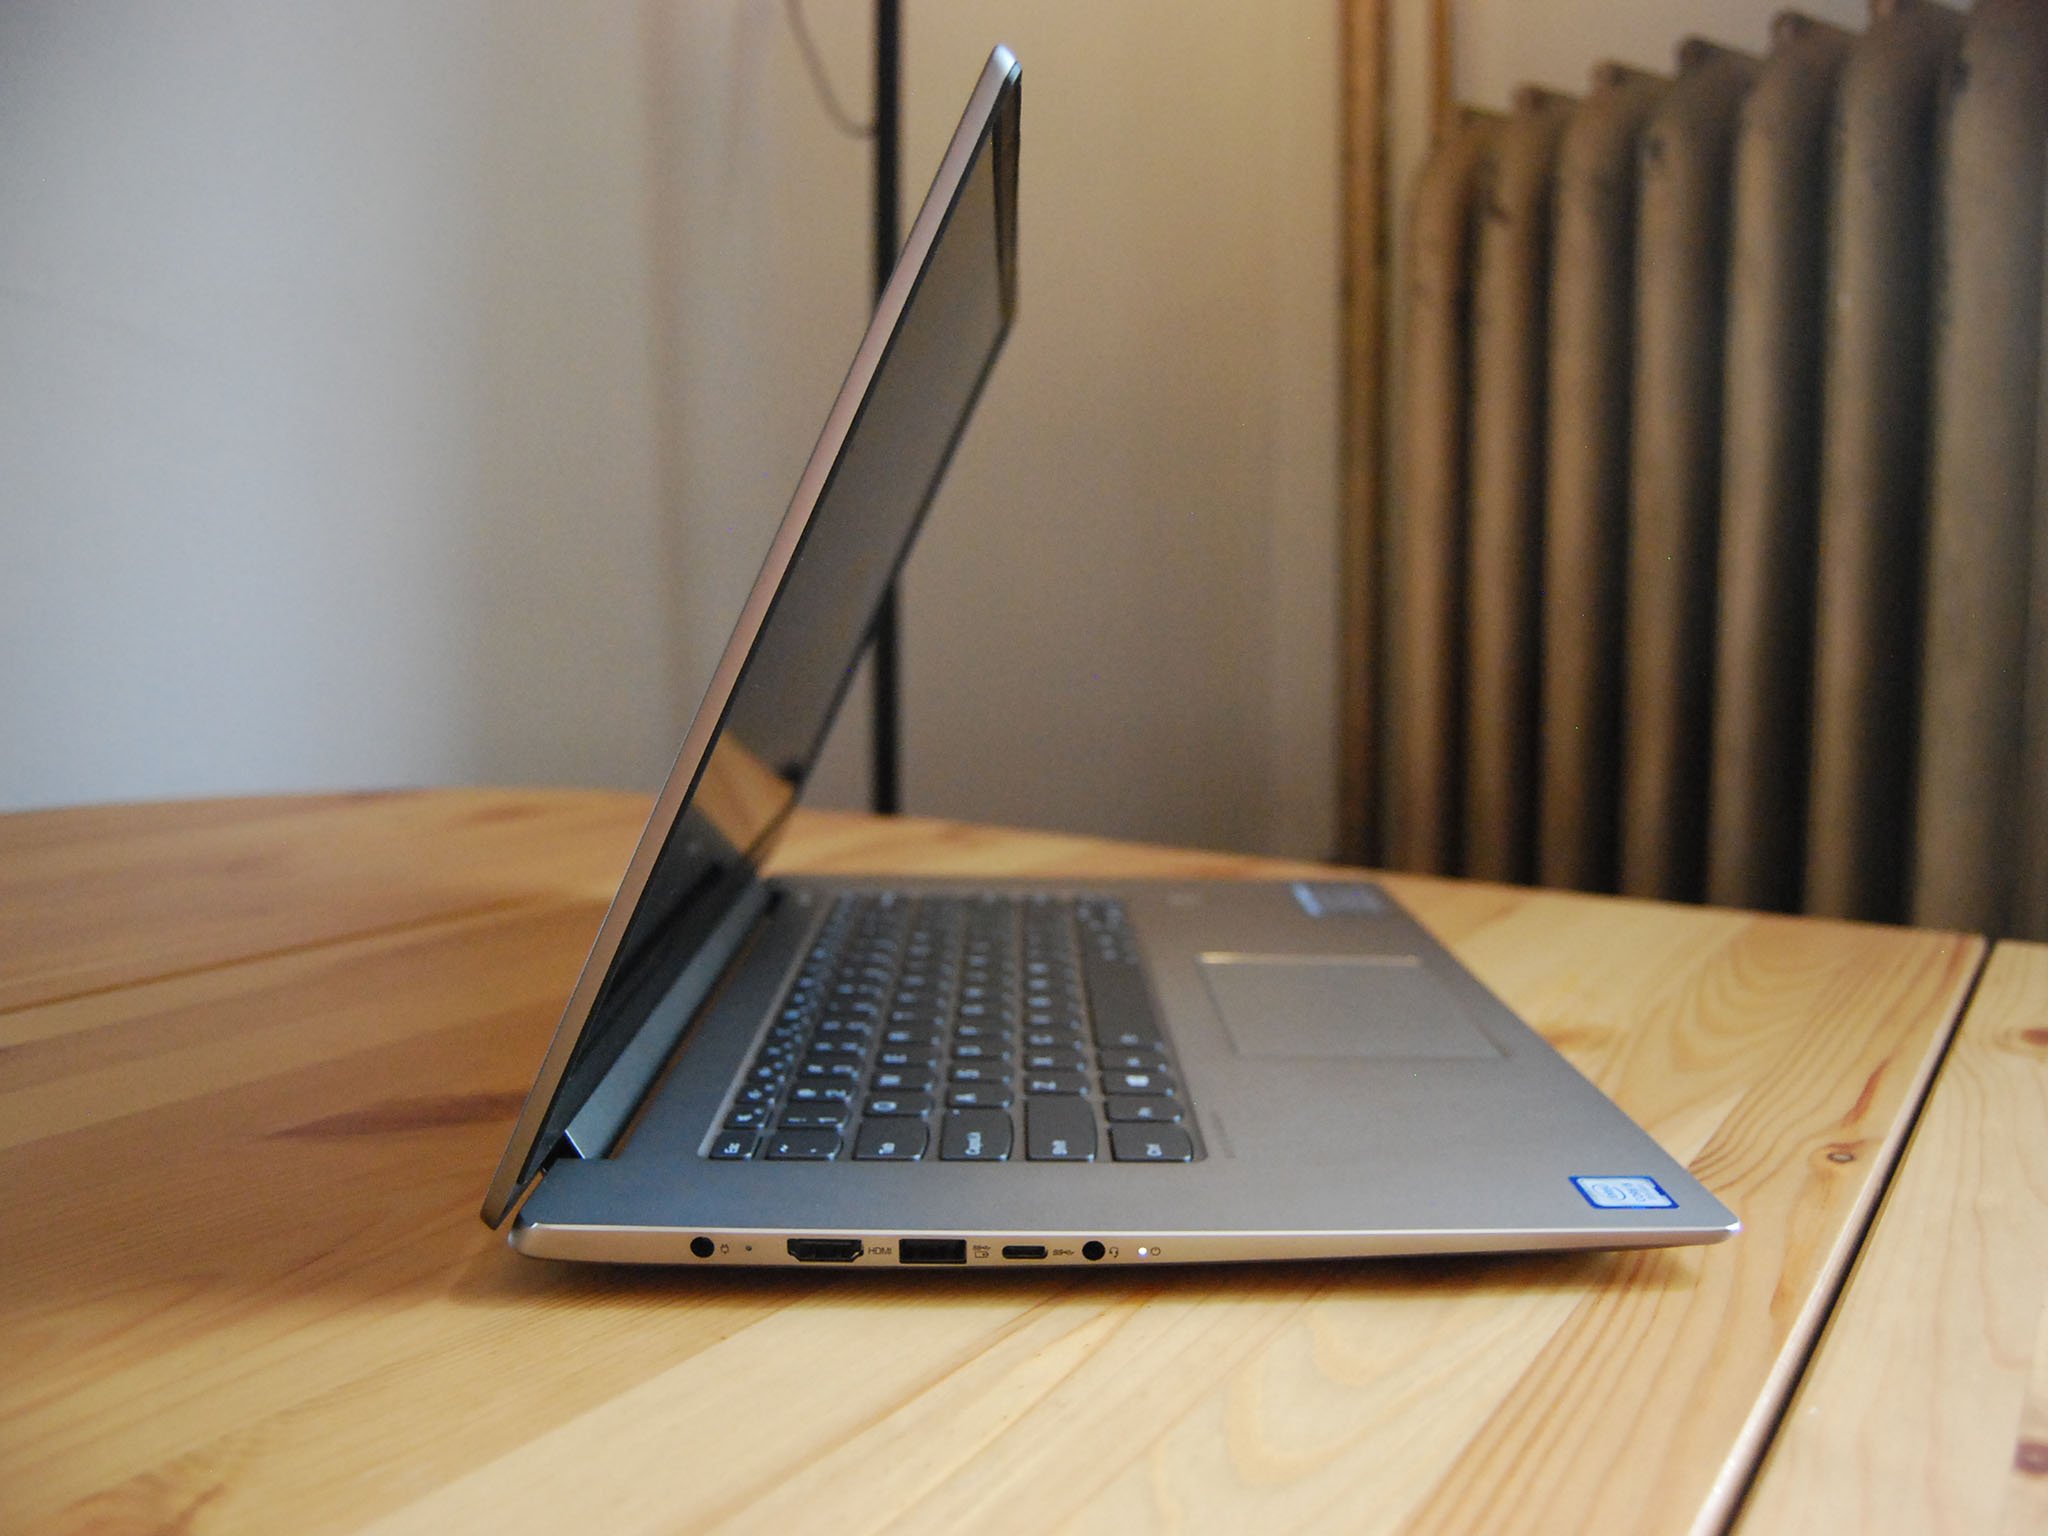 Lenovo Ideapad 530S review: Outstanding performance, so-so